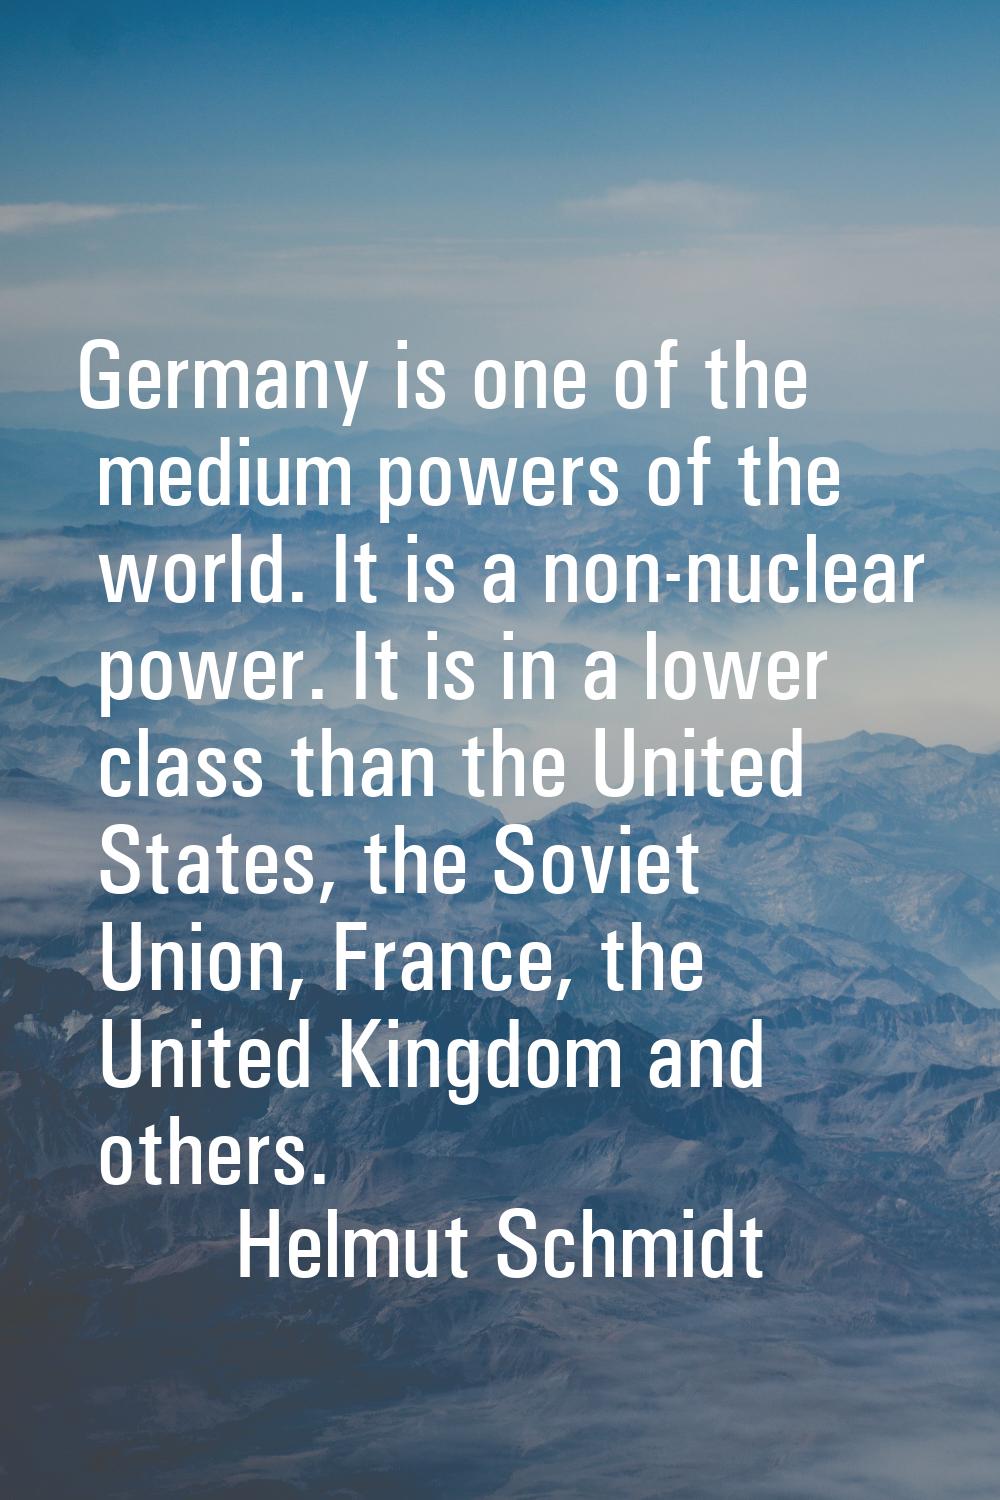 Germany is one of the medium powers of the world. It is a non-nuclear power. It is in a lower class